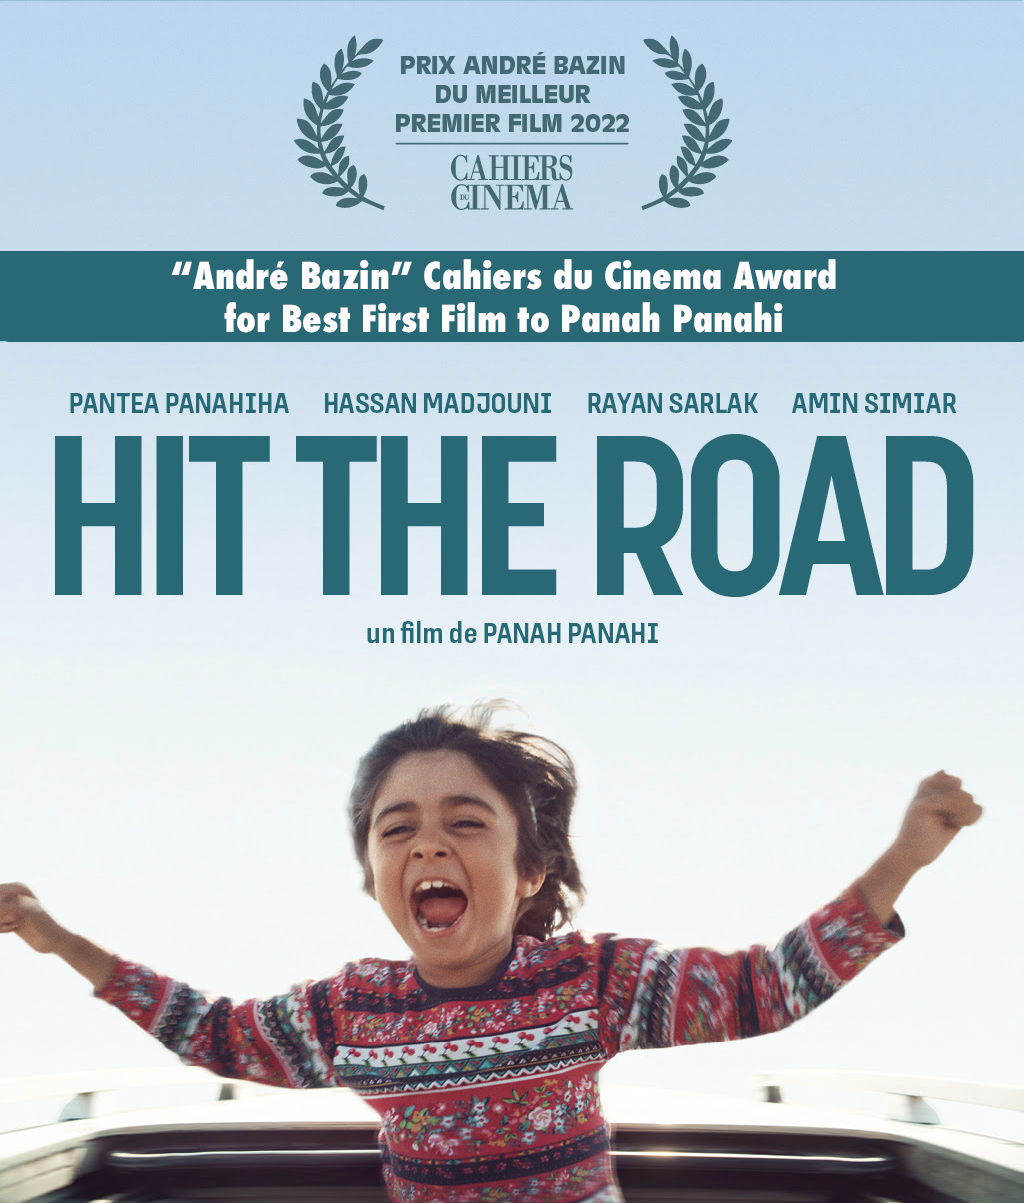 Hit the road won the Les Cahiers du Cinema Andre Bazin Award